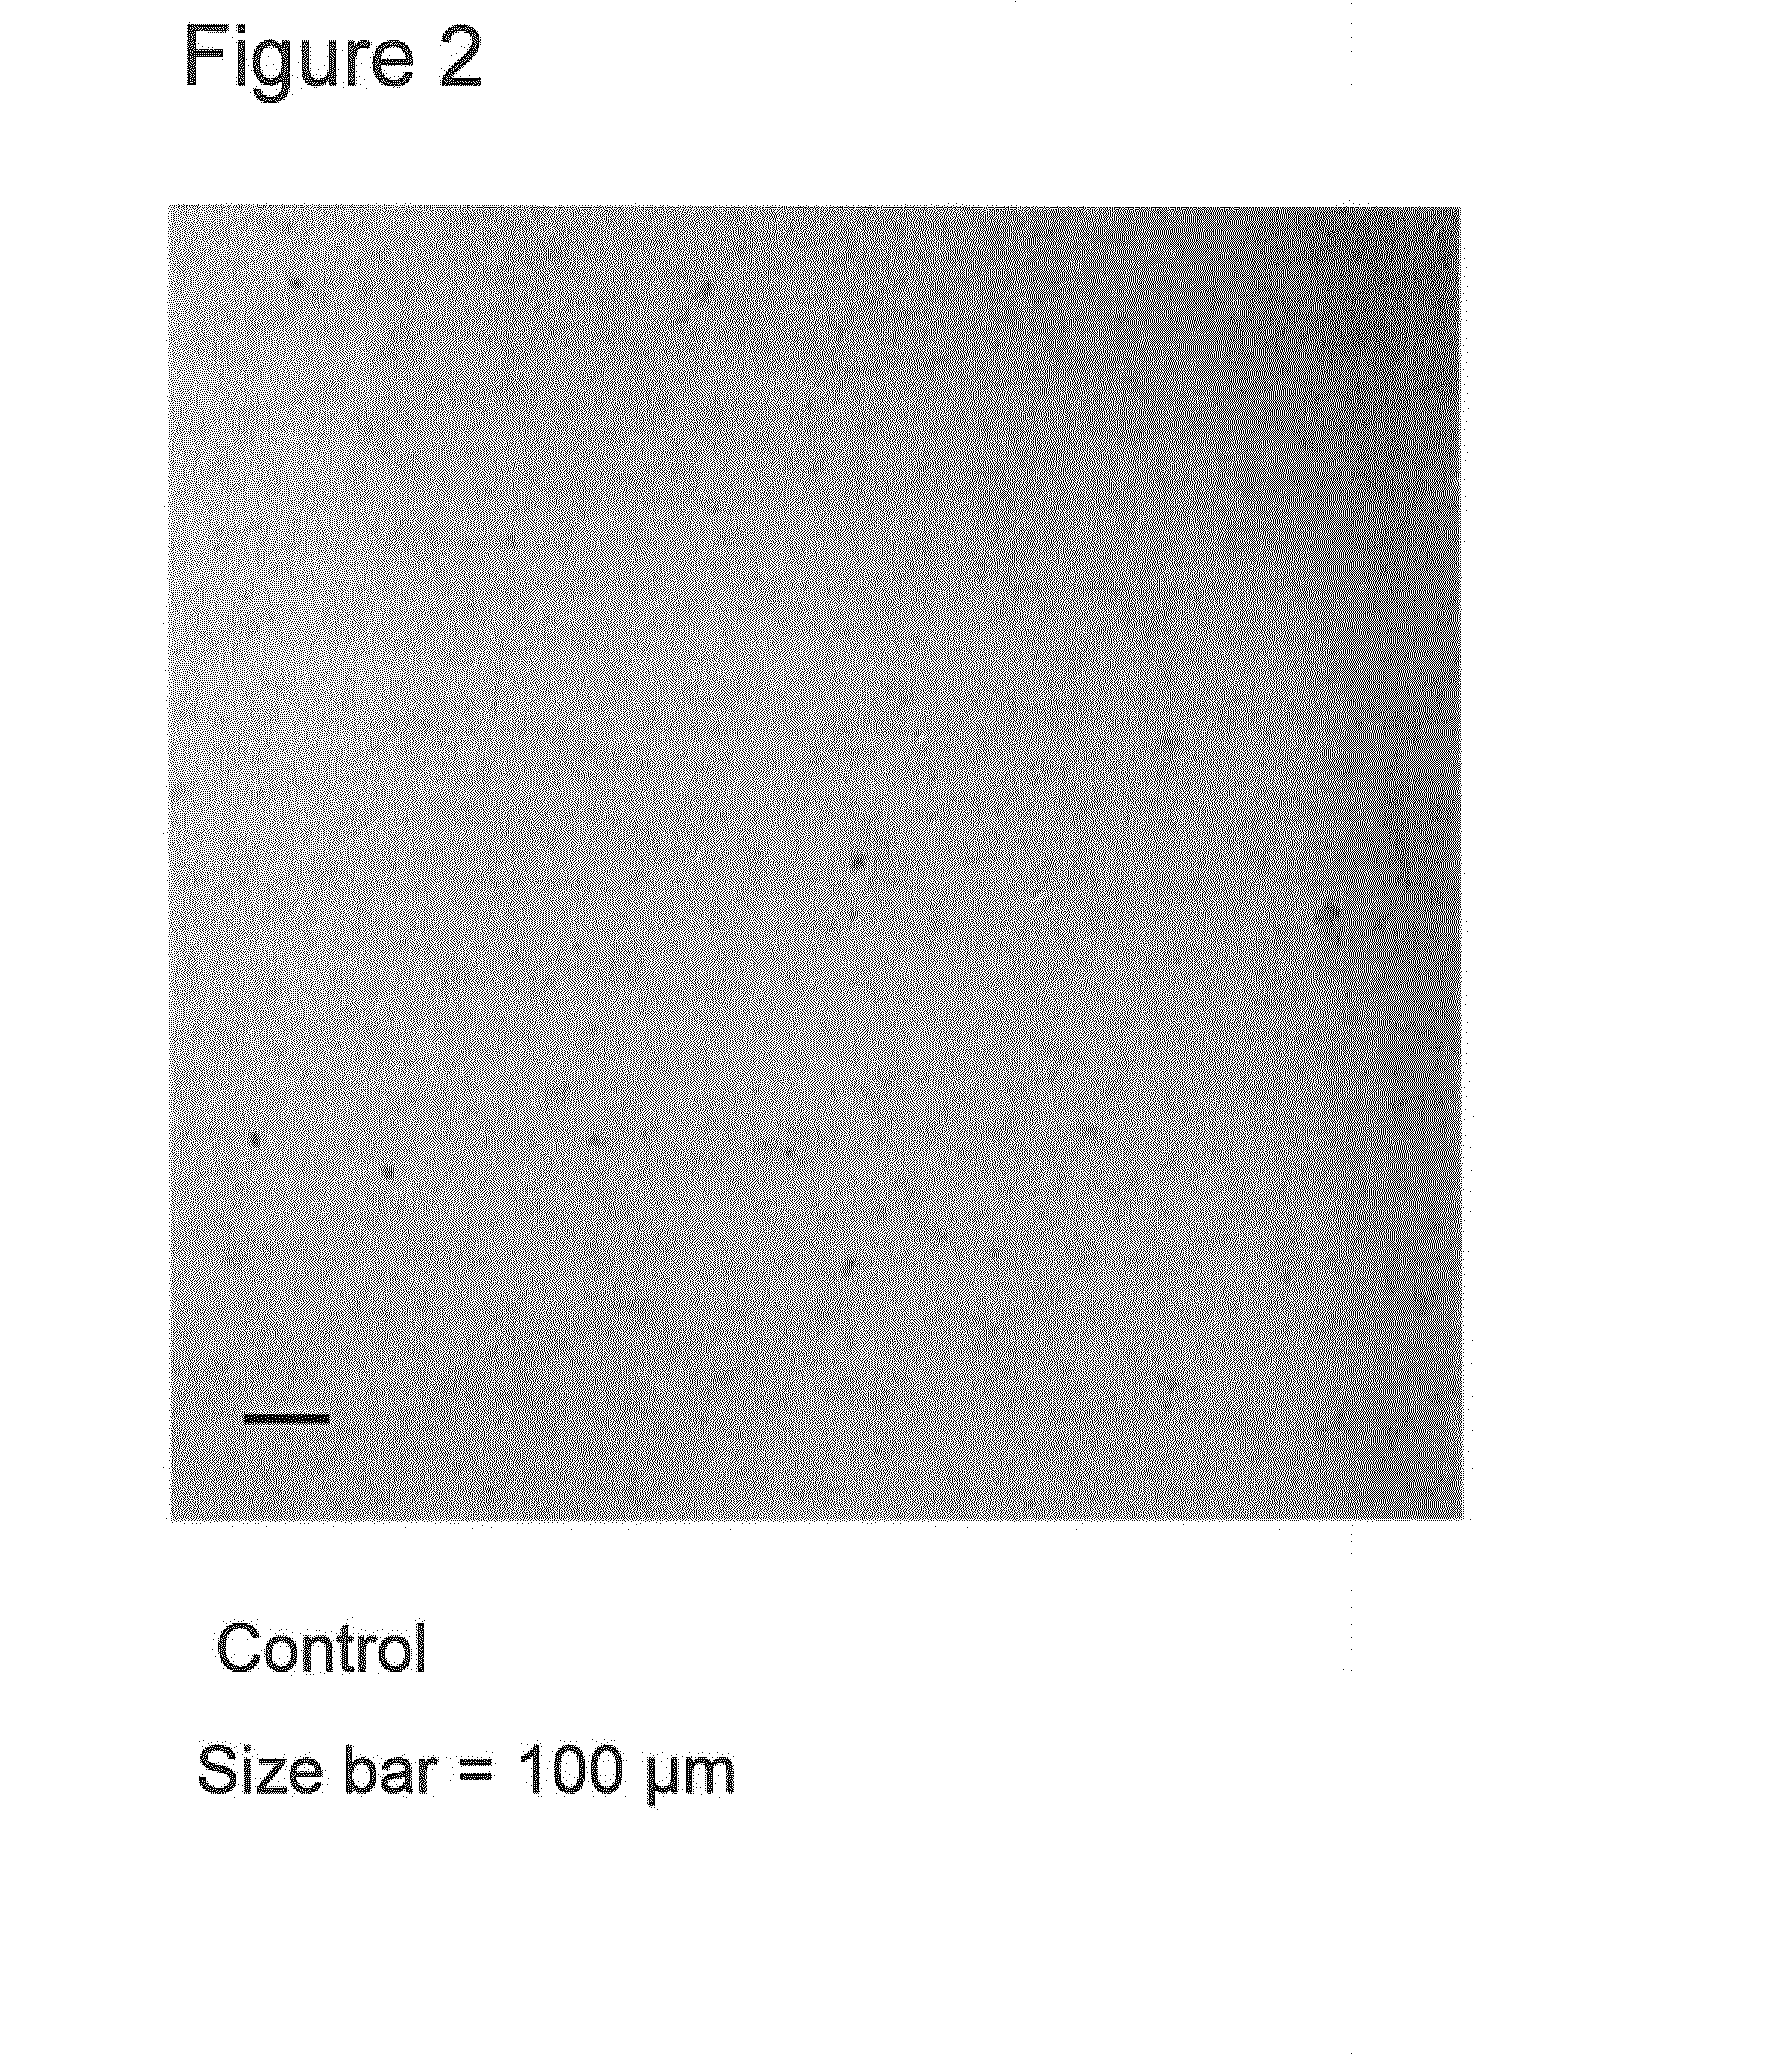 Method of producing frozen confection product